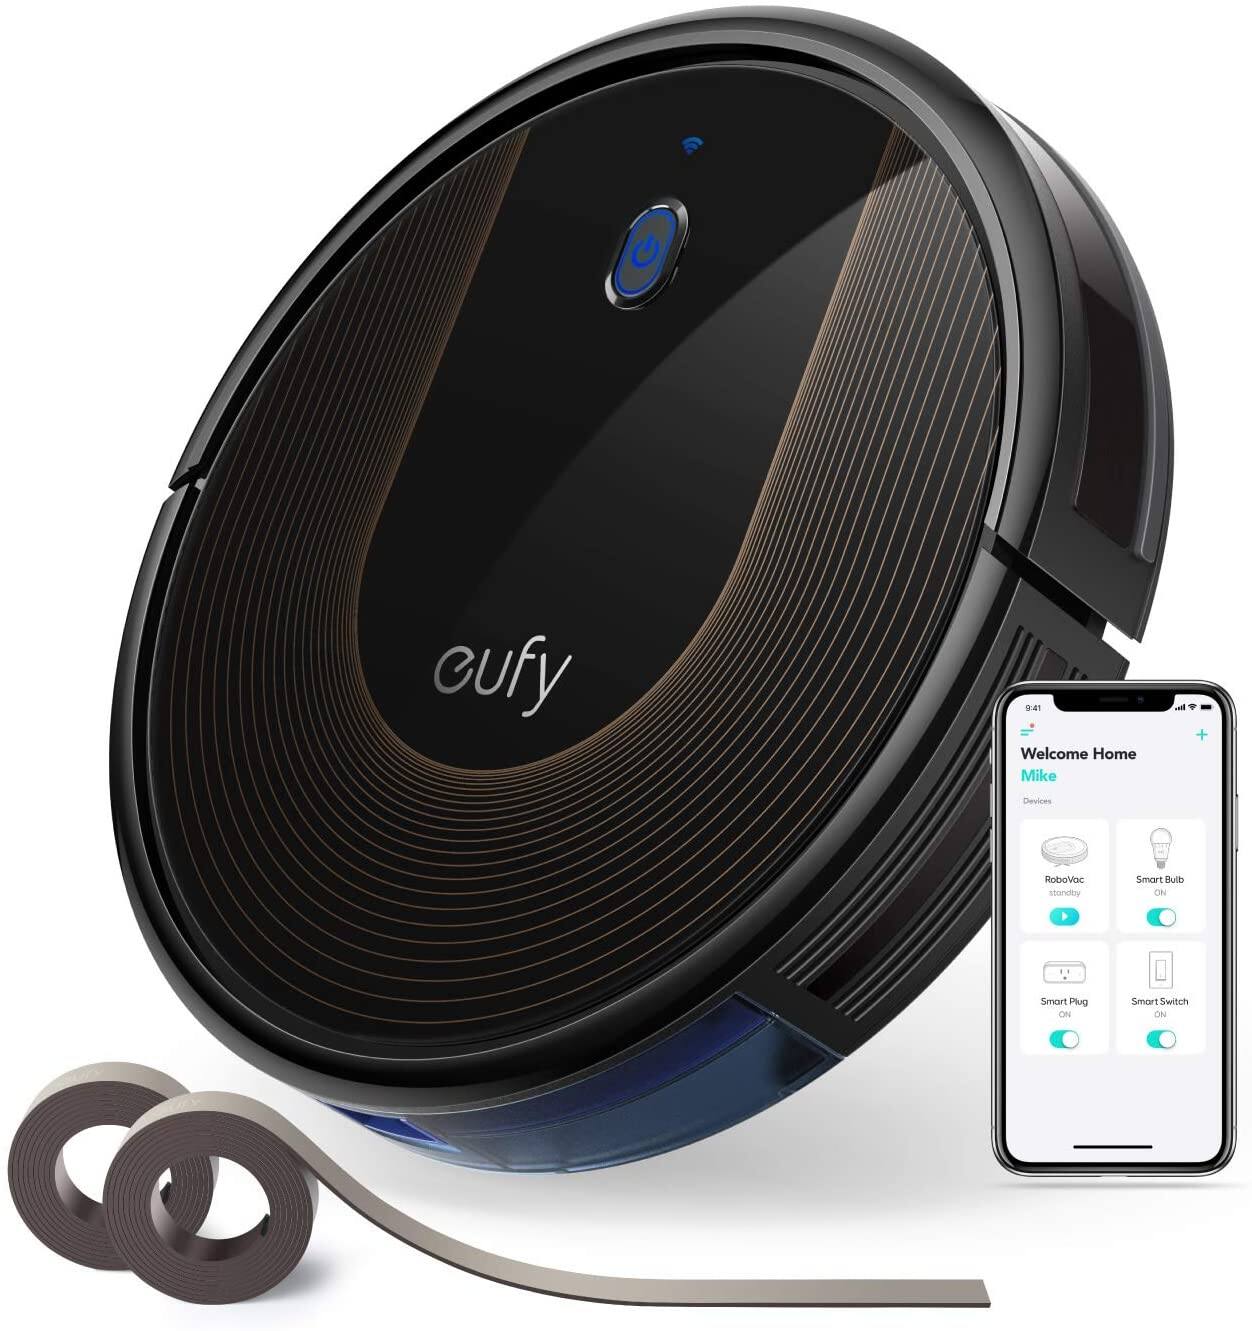 Eufy by Anker RoboVac Robot Vacuum 30C 1500Pa Suction WiFi connected, Boundary Strips Included $179.99 + FSSS